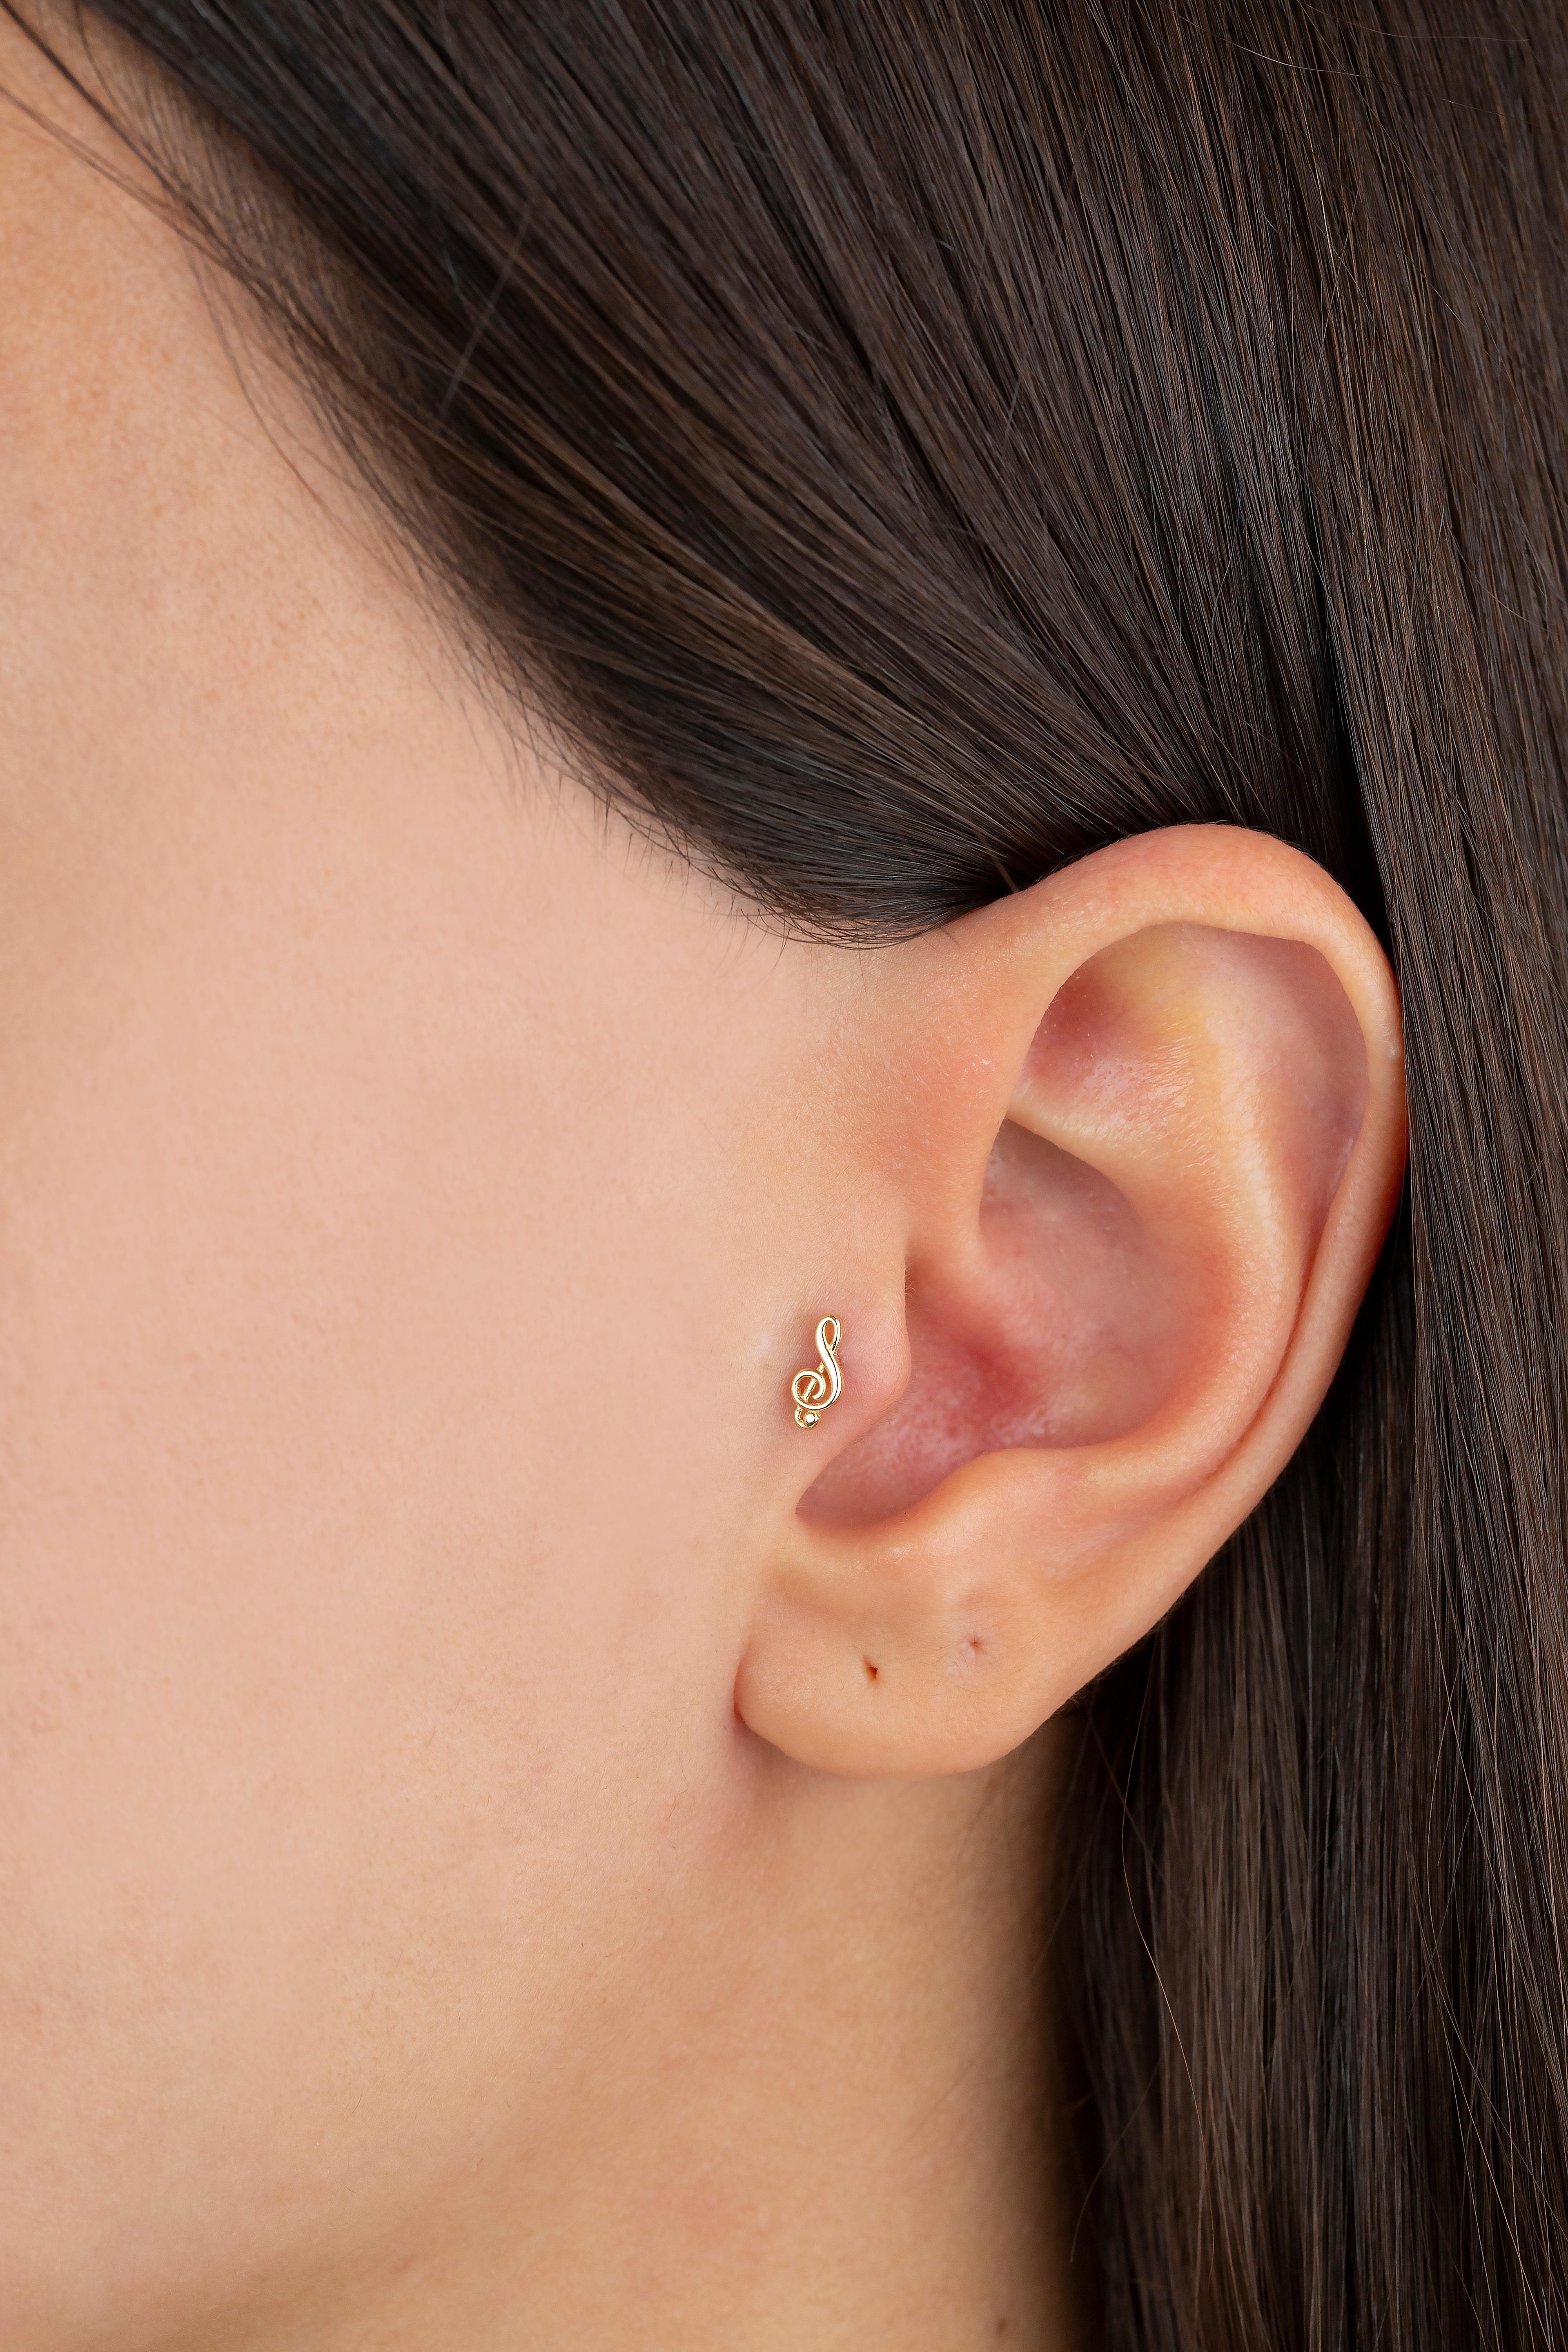 14K Gold Treble clef Piercing, Gold Stud Musical Note Earring

You can use the piercing as an earring too! Also this piercing is suitable for tragus, nose, helix, lobe, flat, medusa, monreo, labret and stud.

This piercing was made with quality